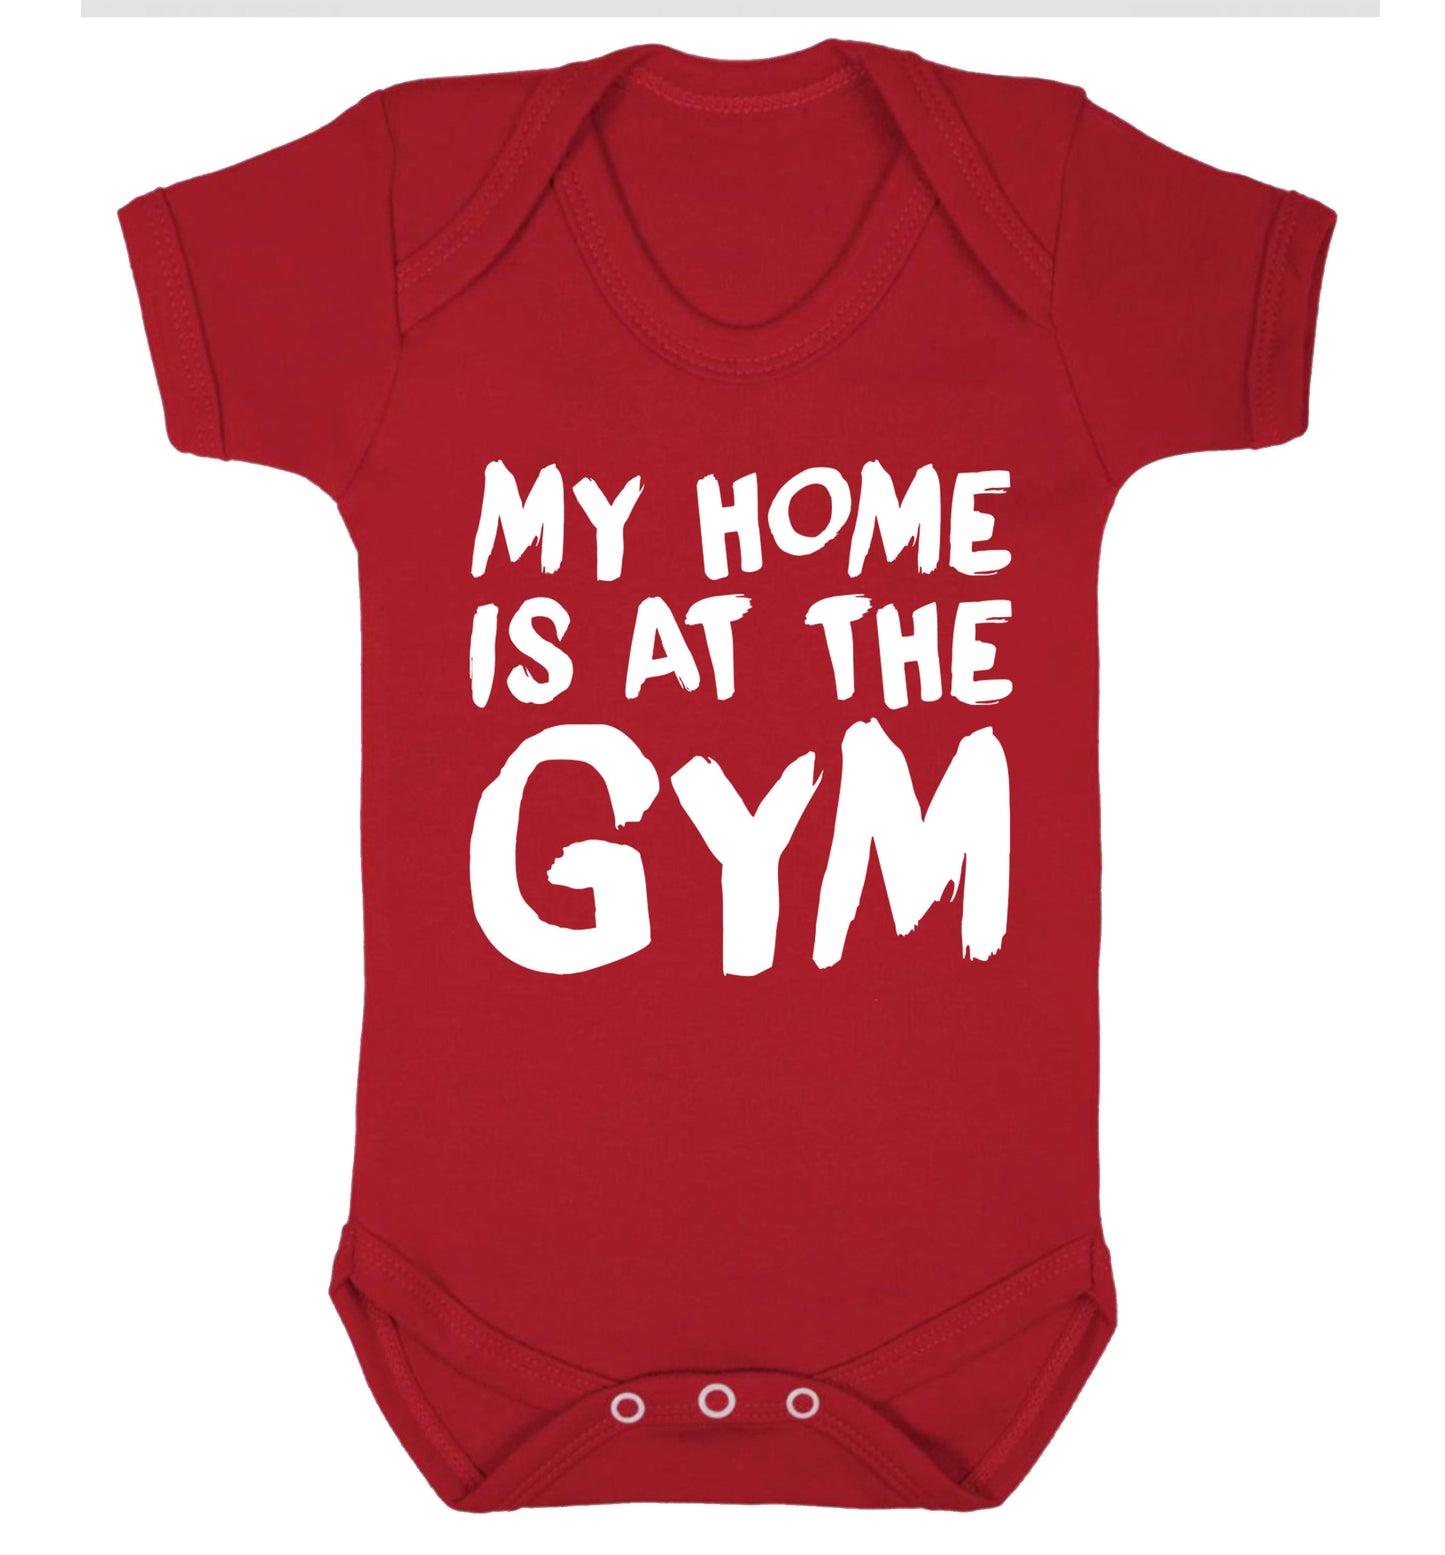 My home is at the gym Baby Vest red 18-24 months